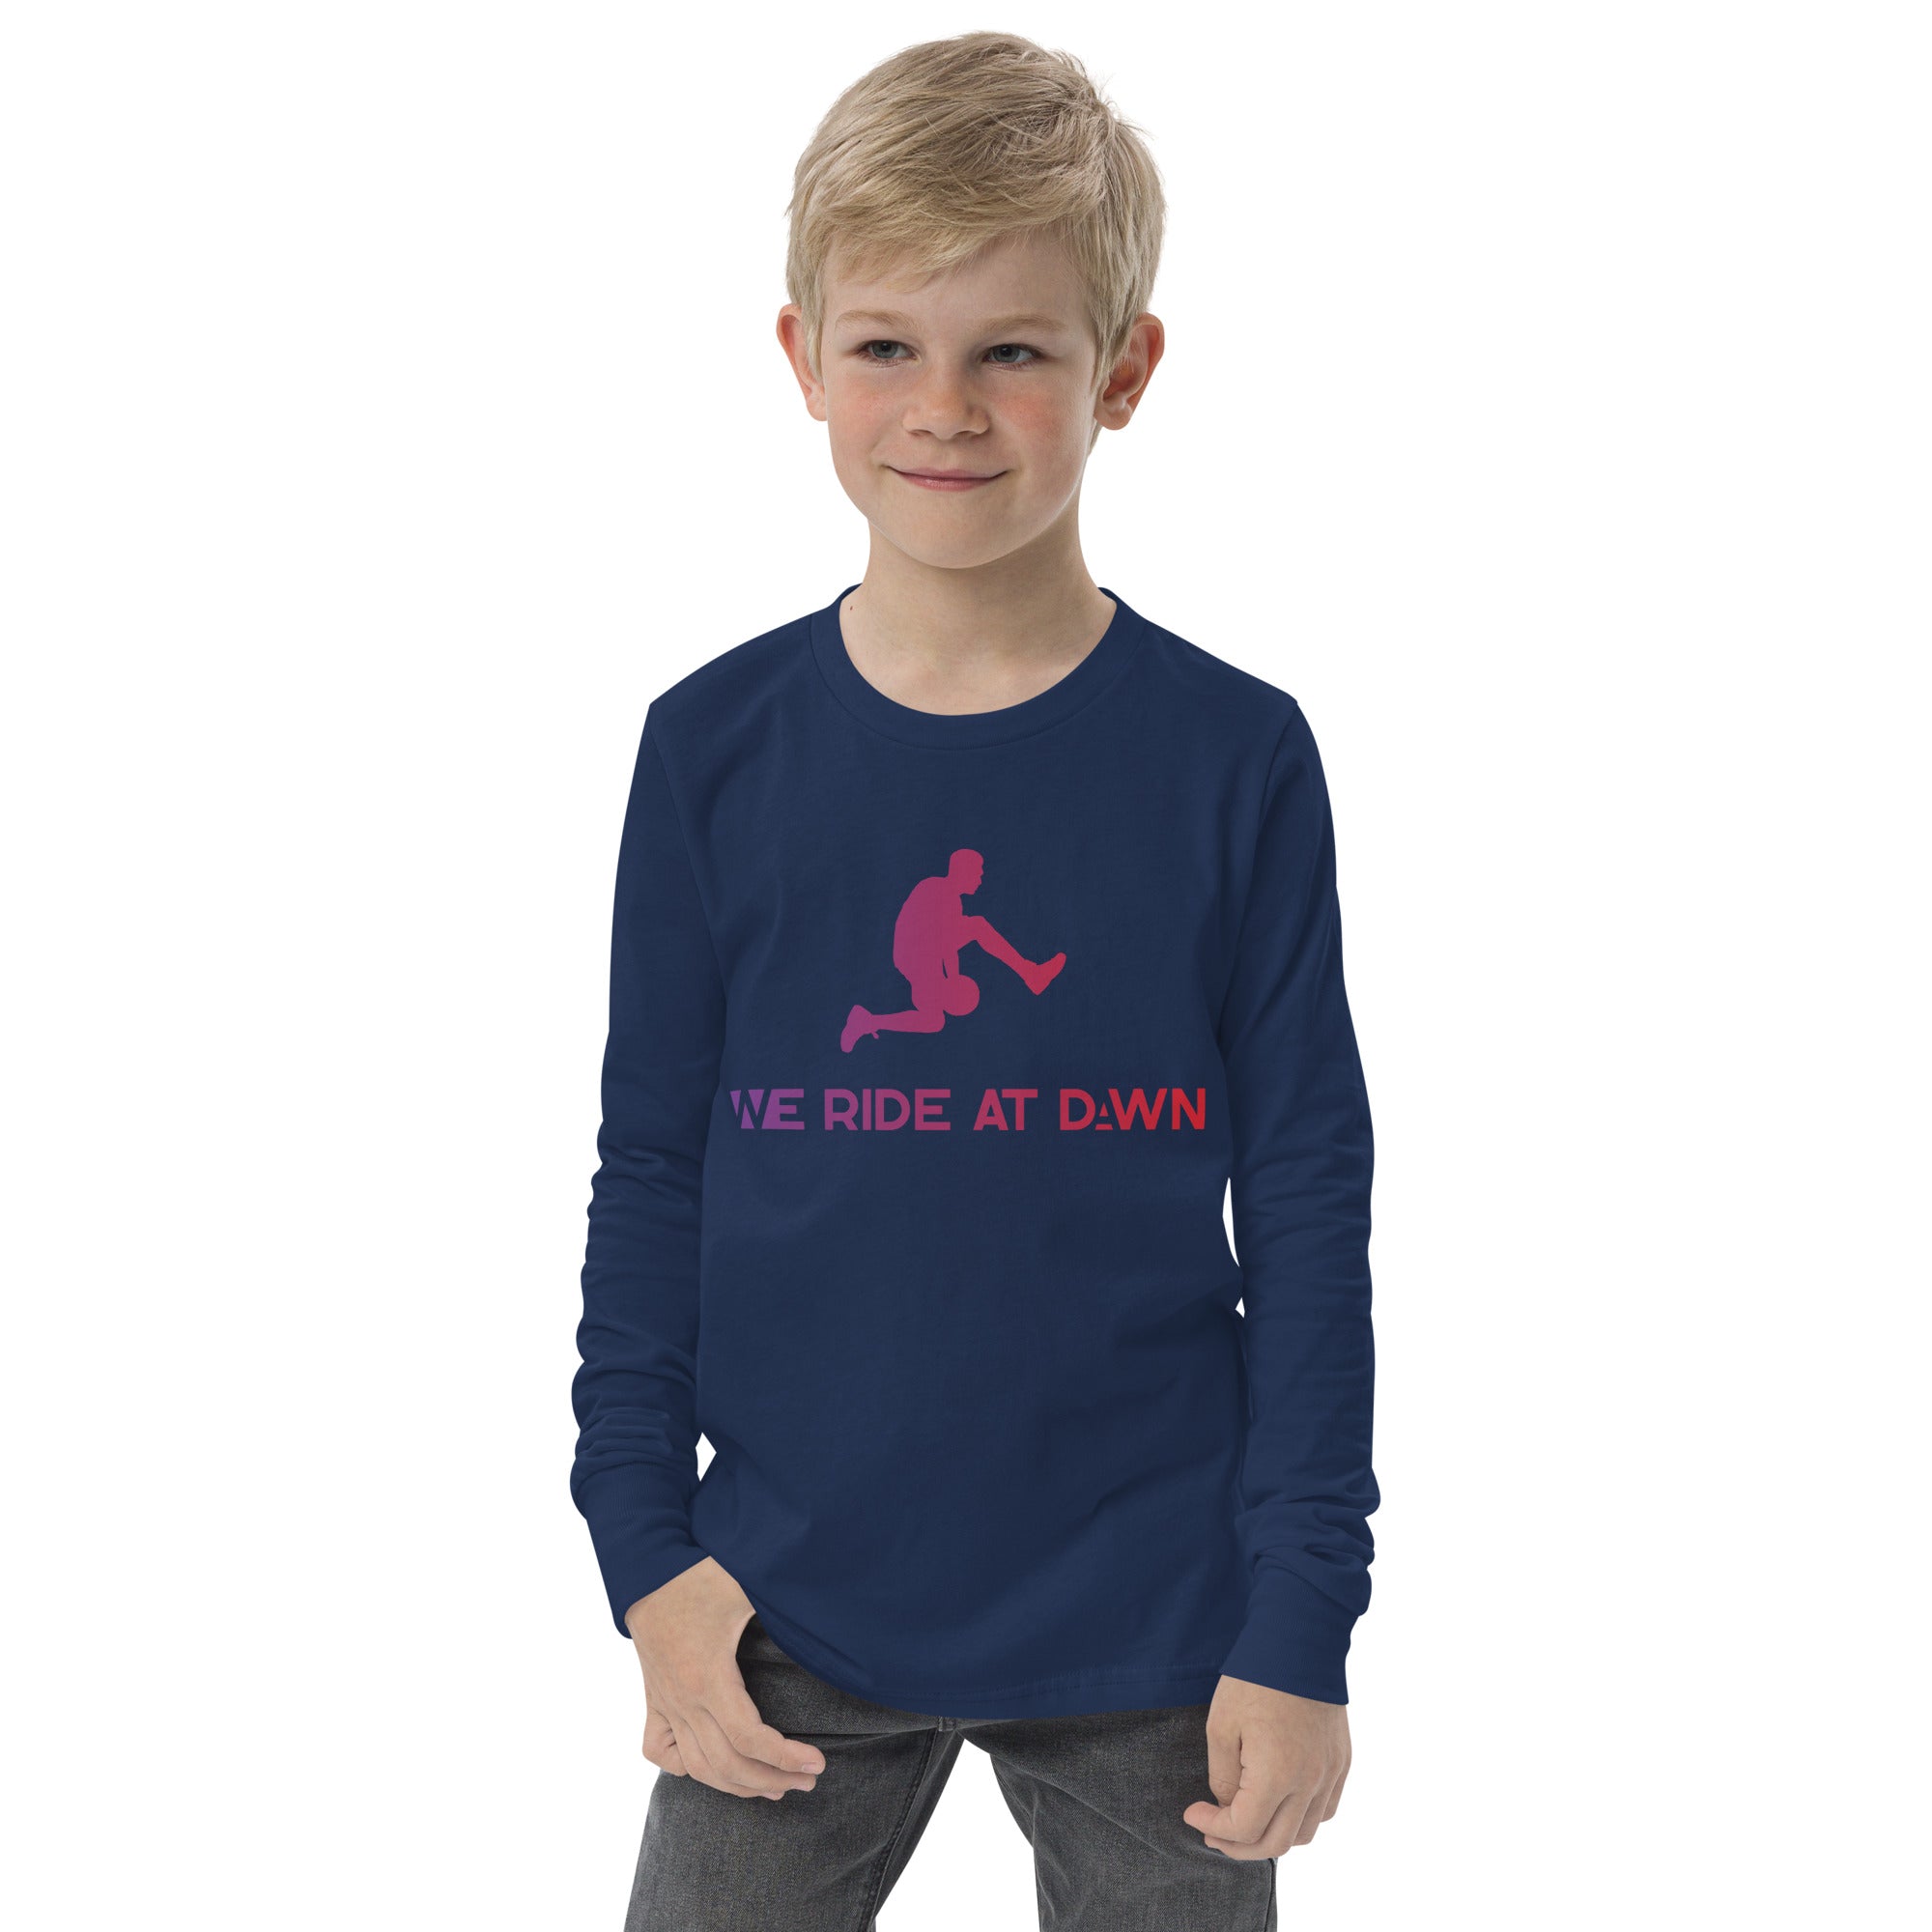 We Ride at Dawn Unisex Youth Long Sleeve Tee